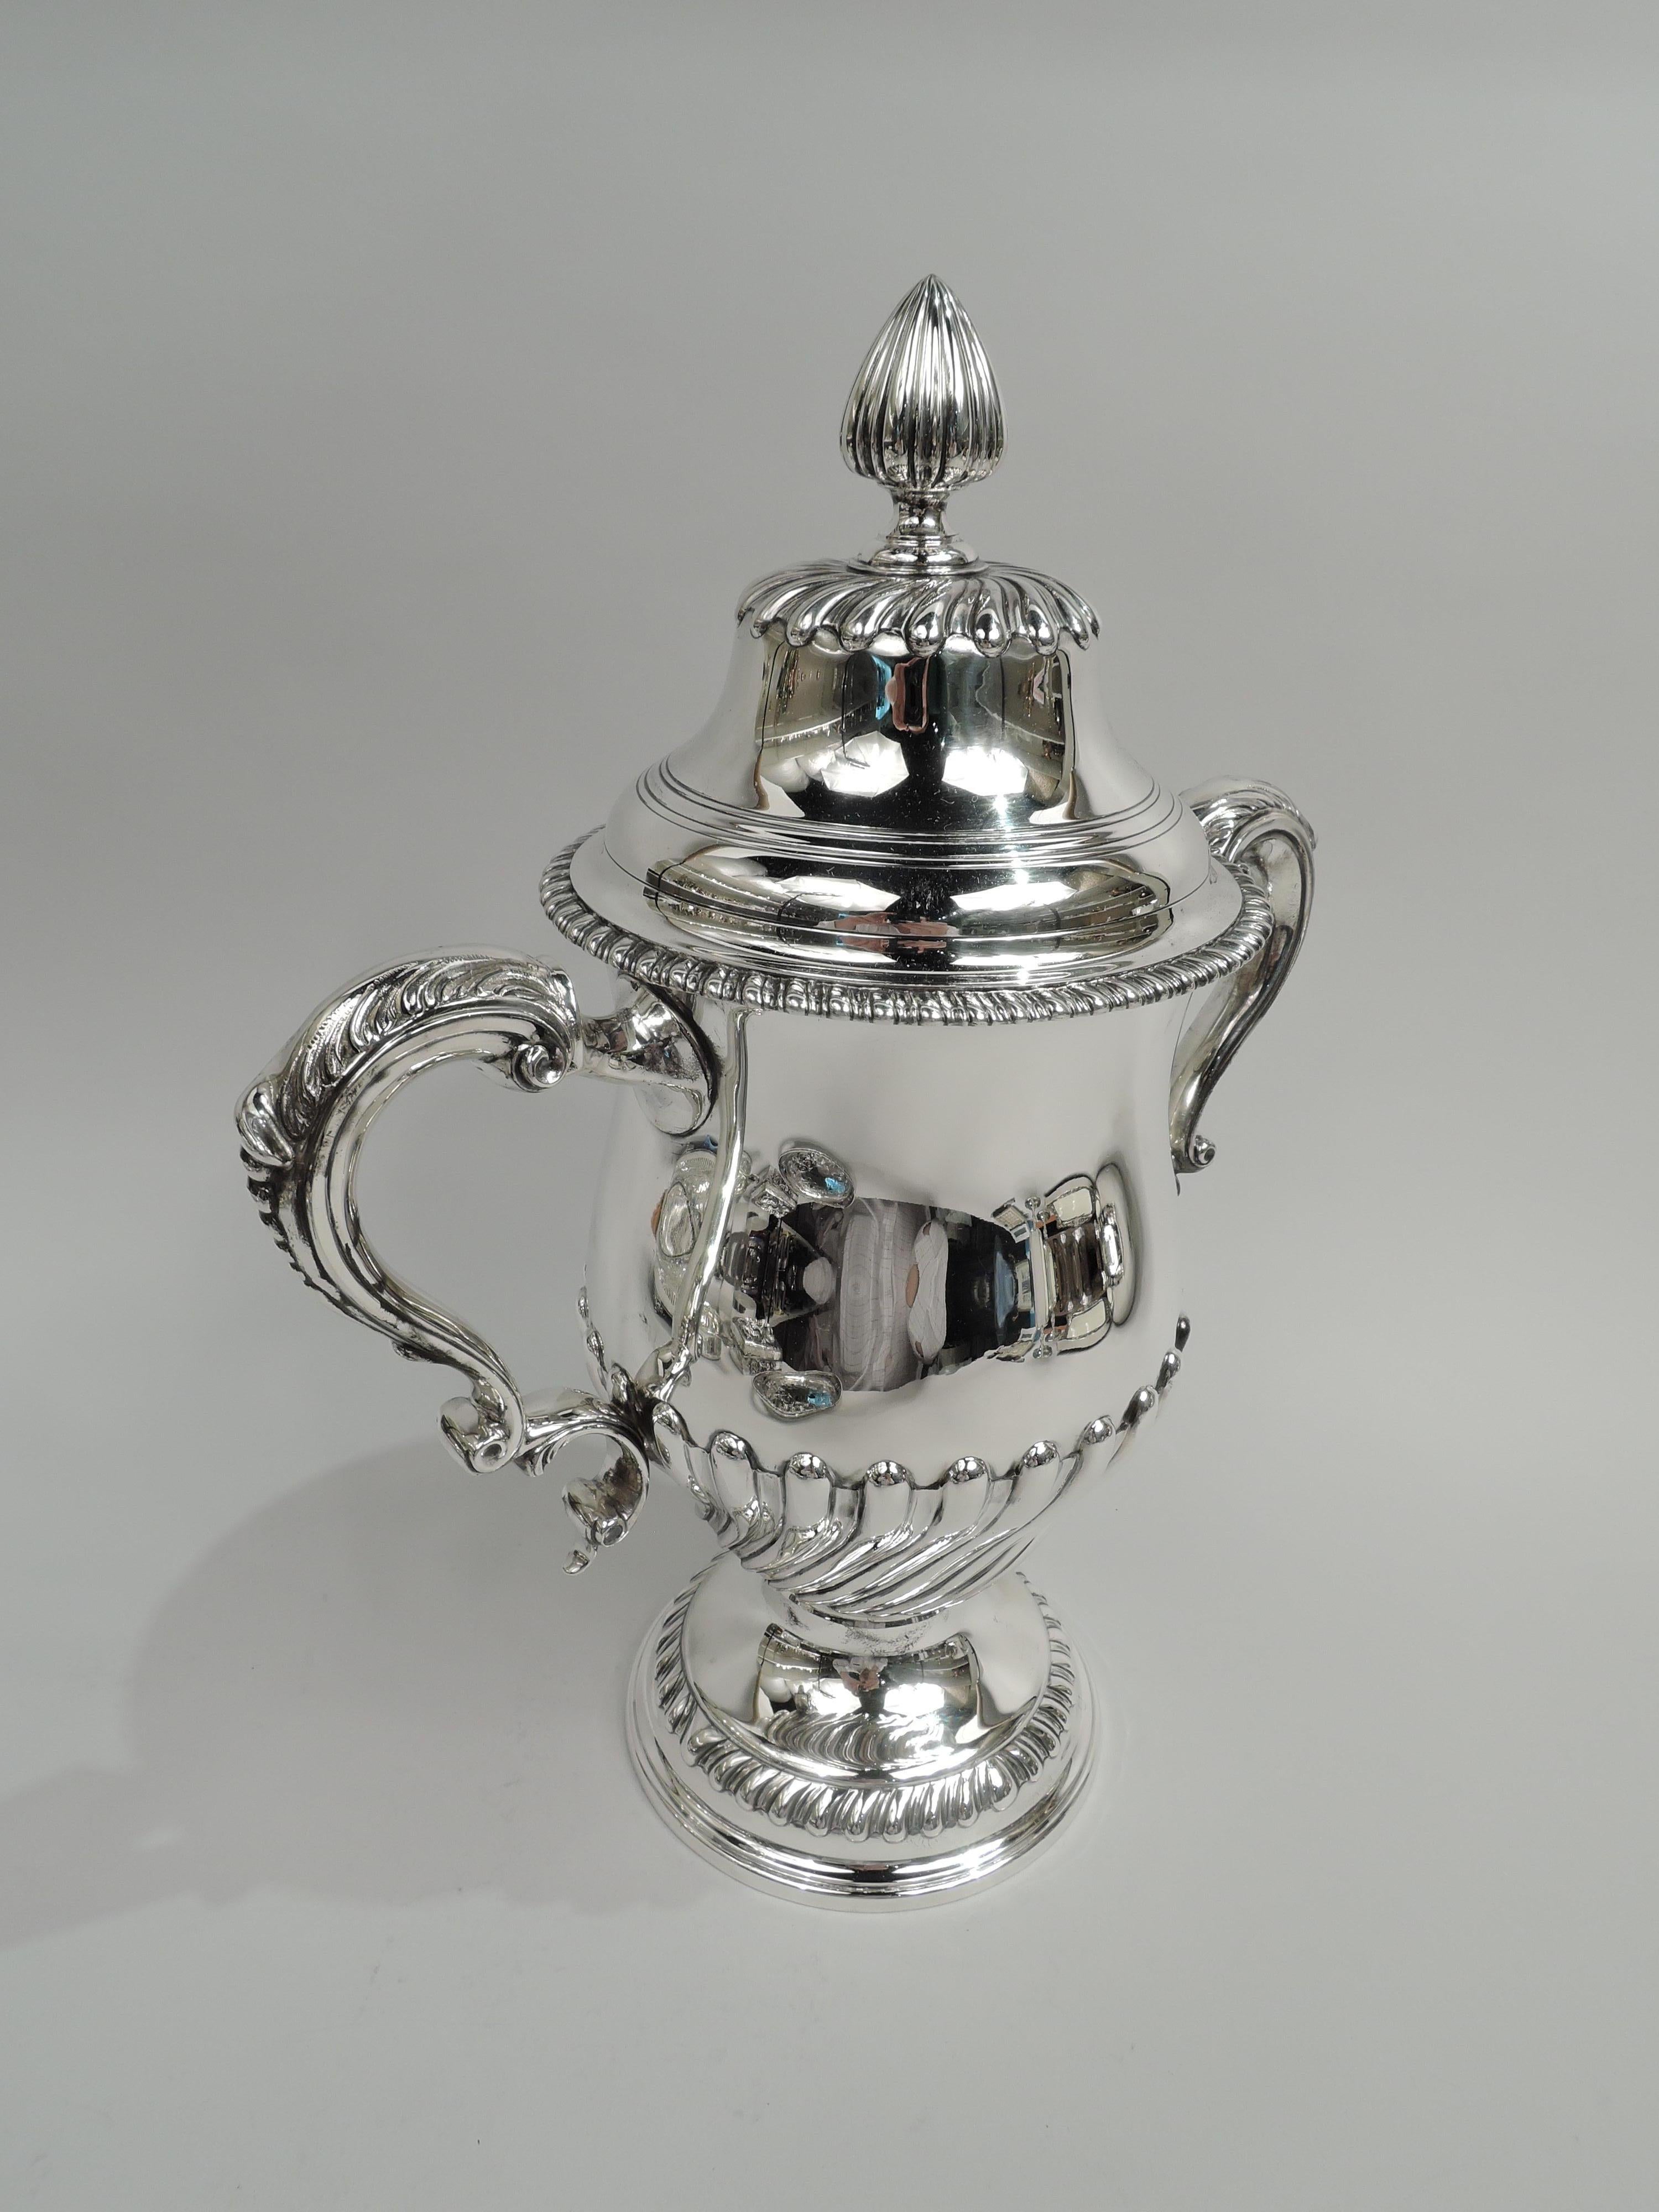 Edwardian Classical sterling silver covered urn. Made by Tiffany & Co. in New York, circa 1913. Ovoid bowl on domed foot. Leaf-capped double-scroll side handles. Cover domed with bud finial and incised rings. Gadrooning and twisted fluting.